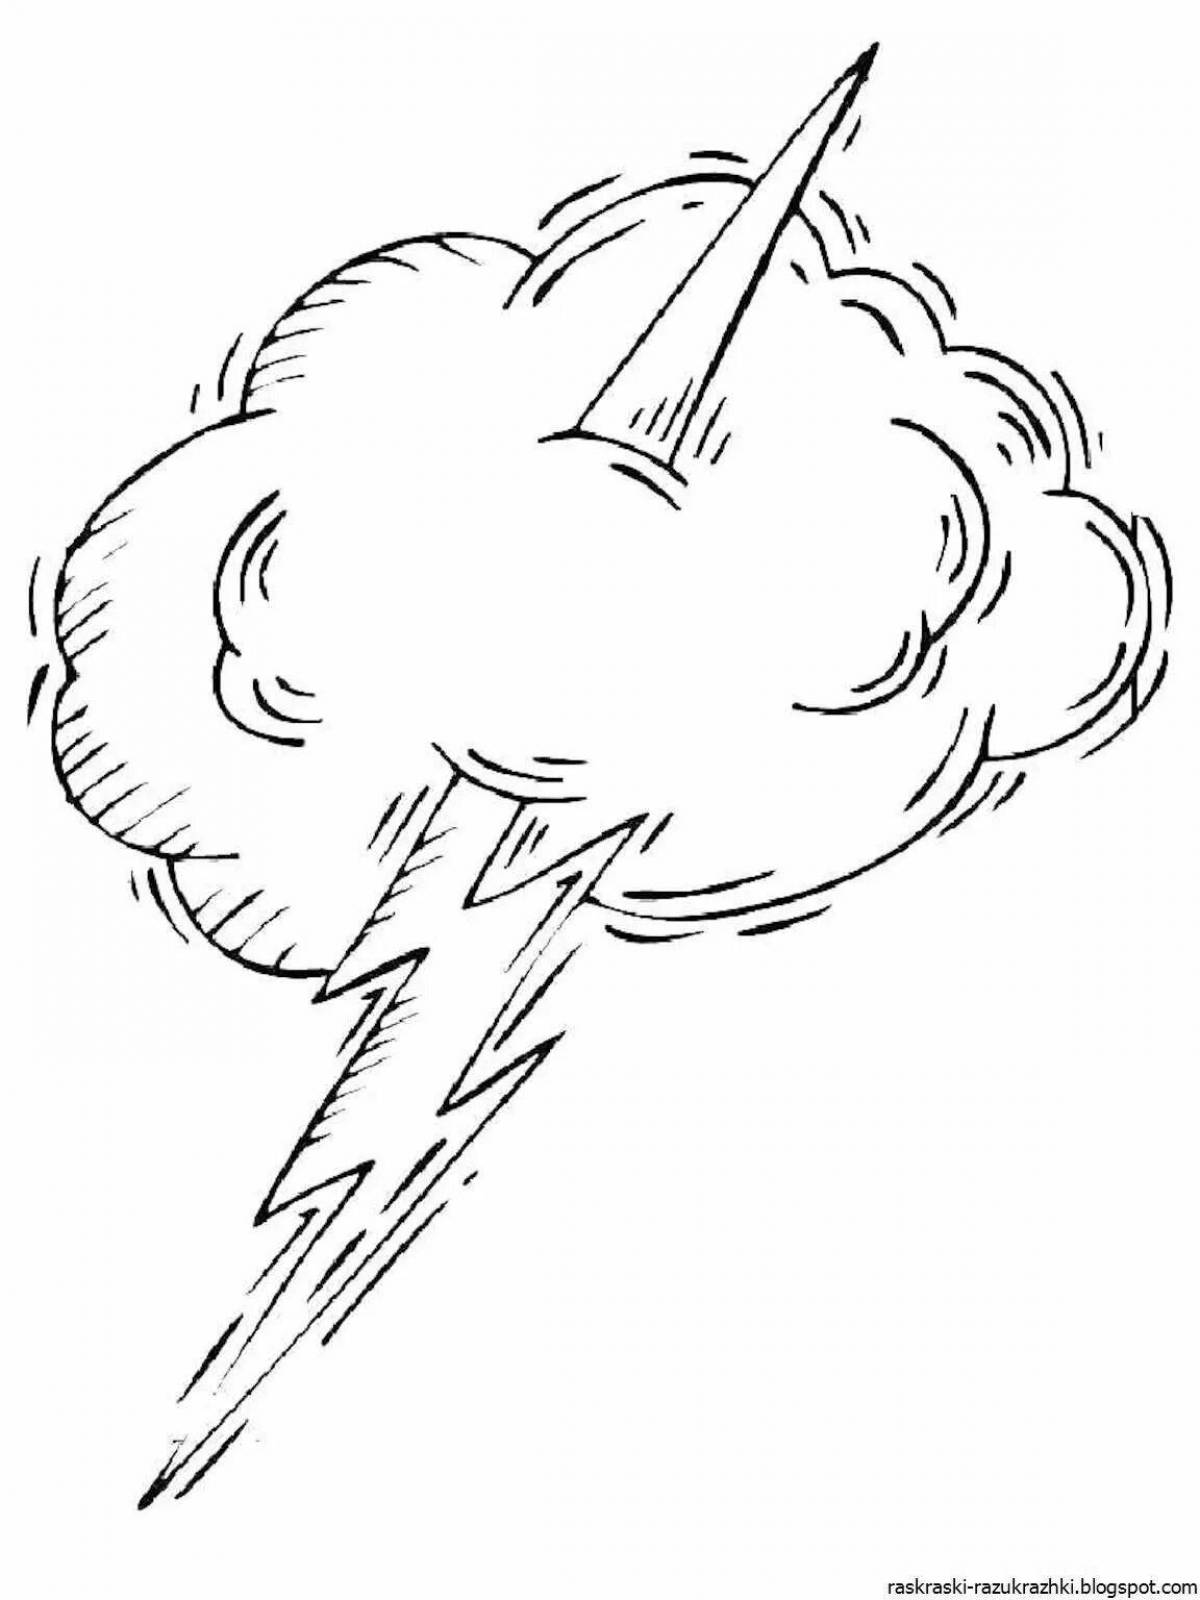 Courageous Thunderstorm Coloring Page for Children